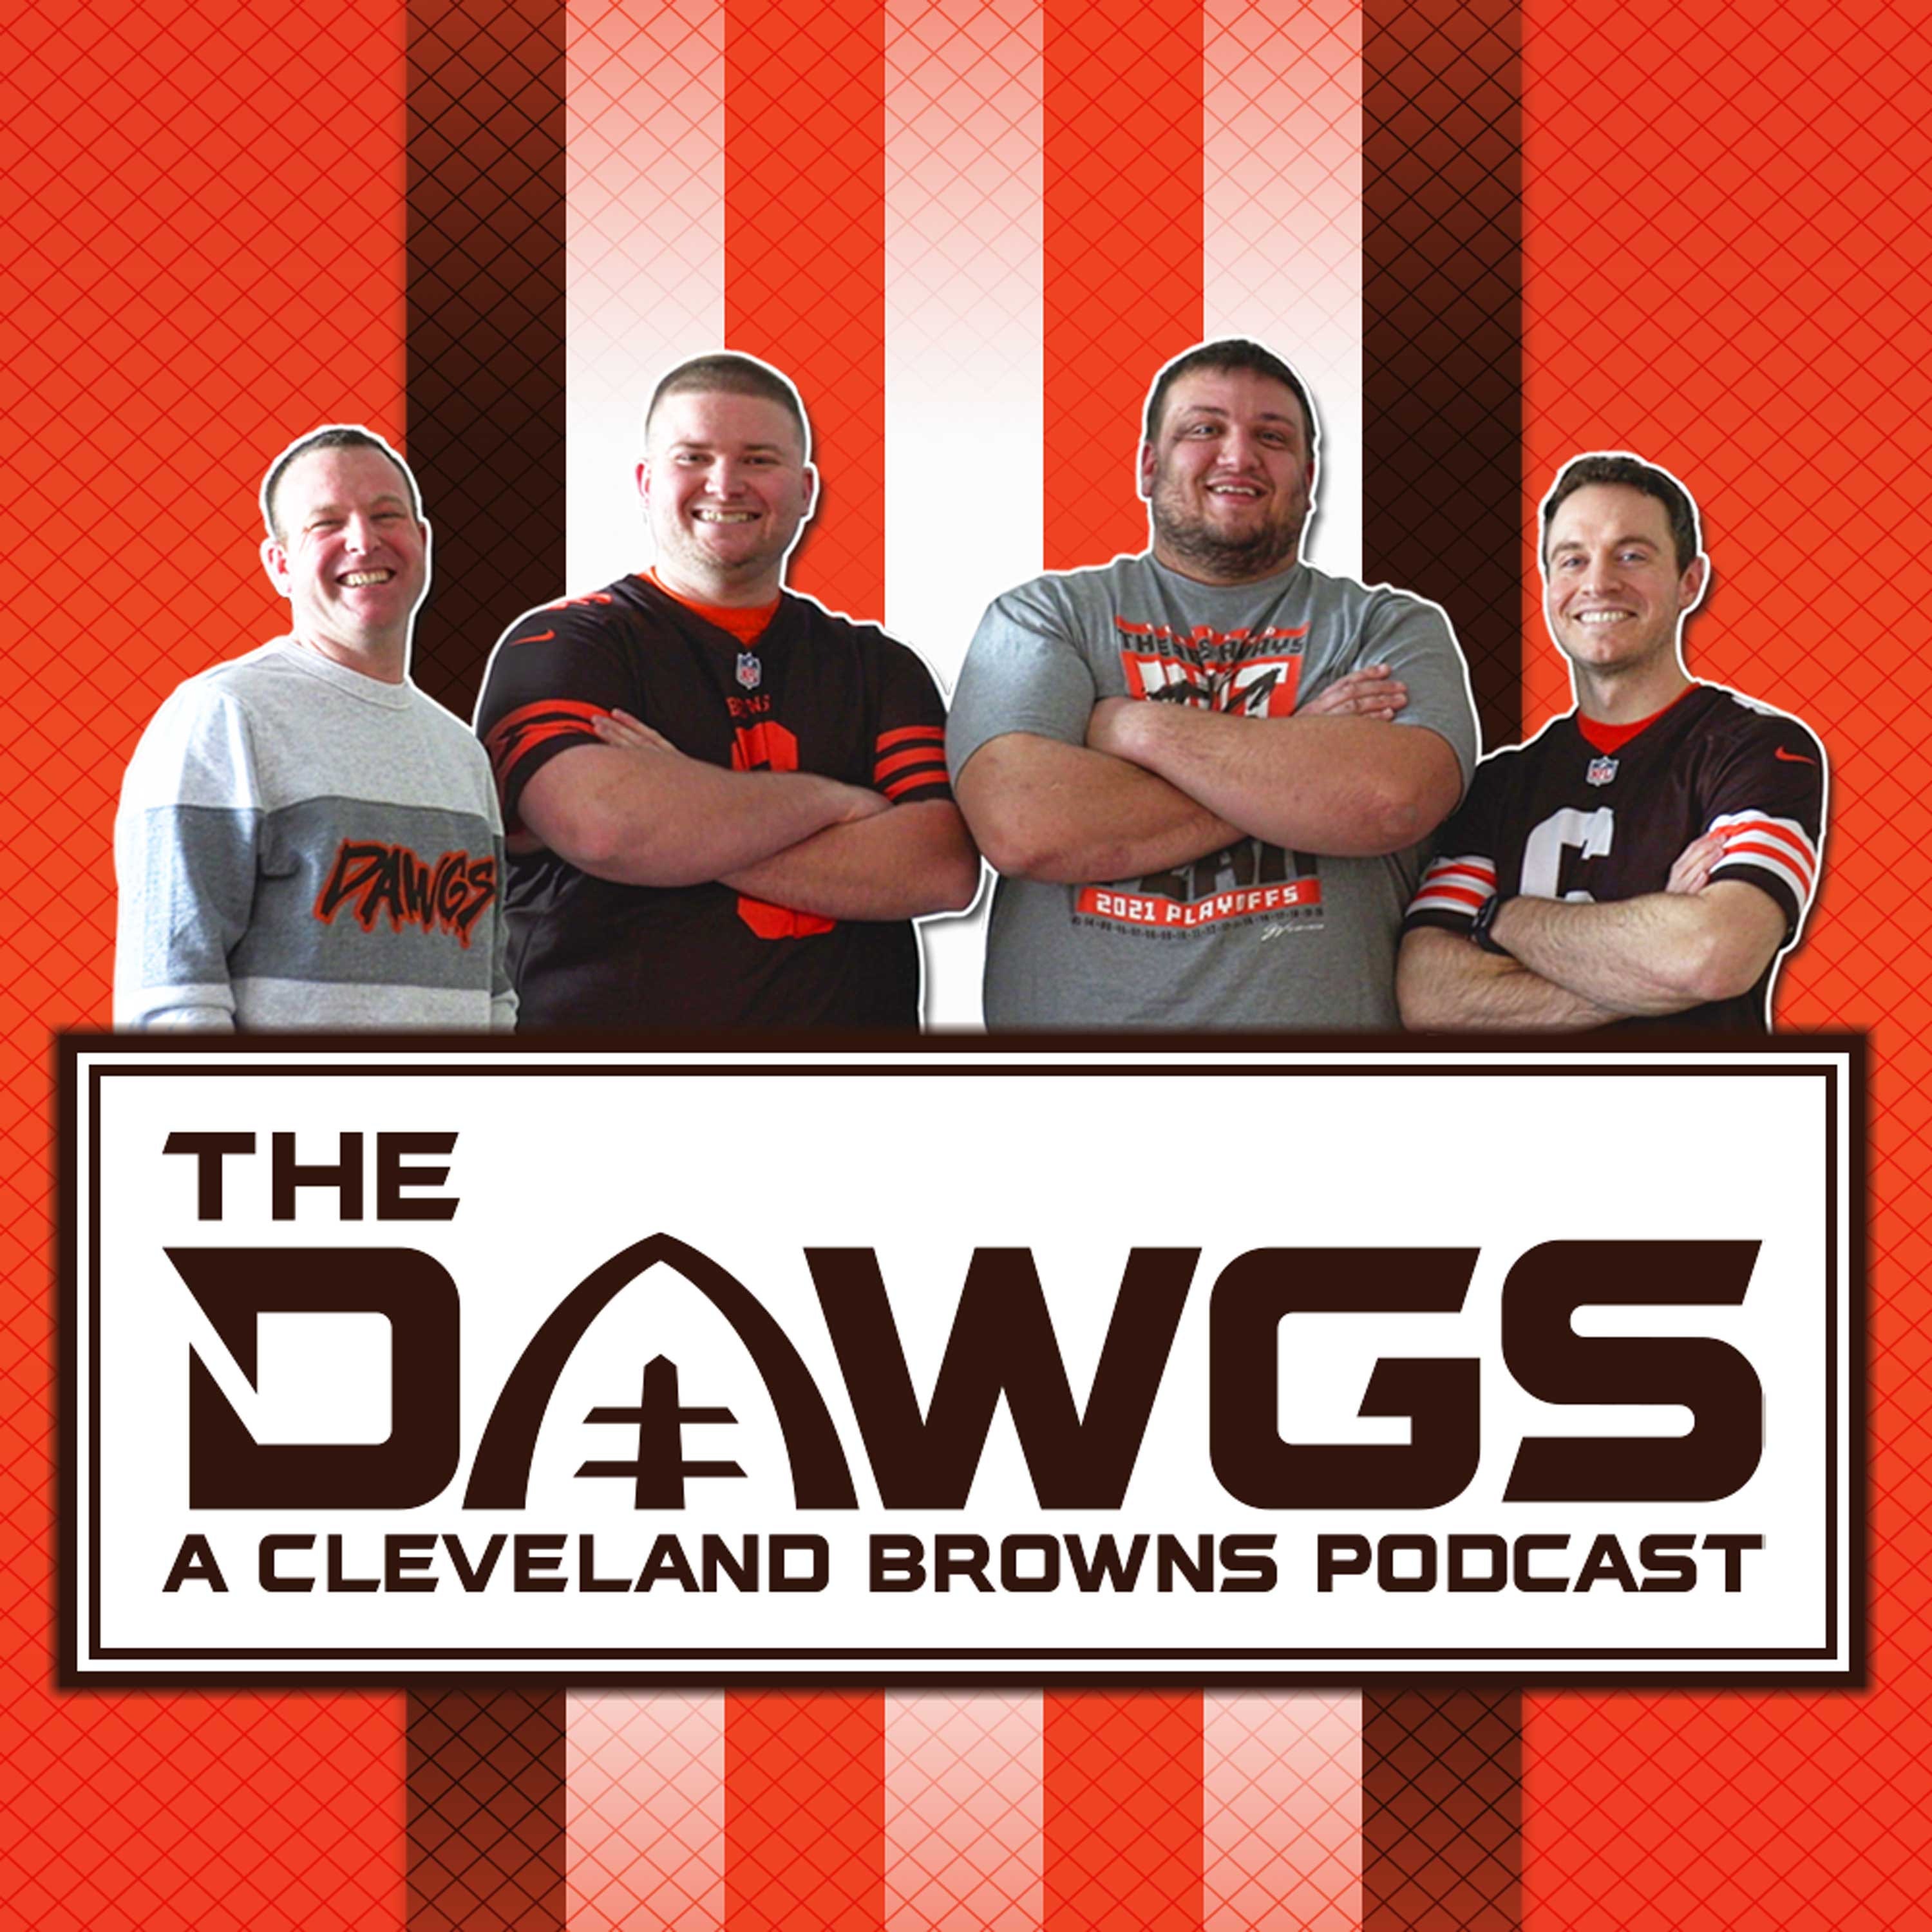 Wild Card: Steelers Recap + Steelers Preview | The Dawgs - A Cleveland Browns Podcast - January 6, 2021